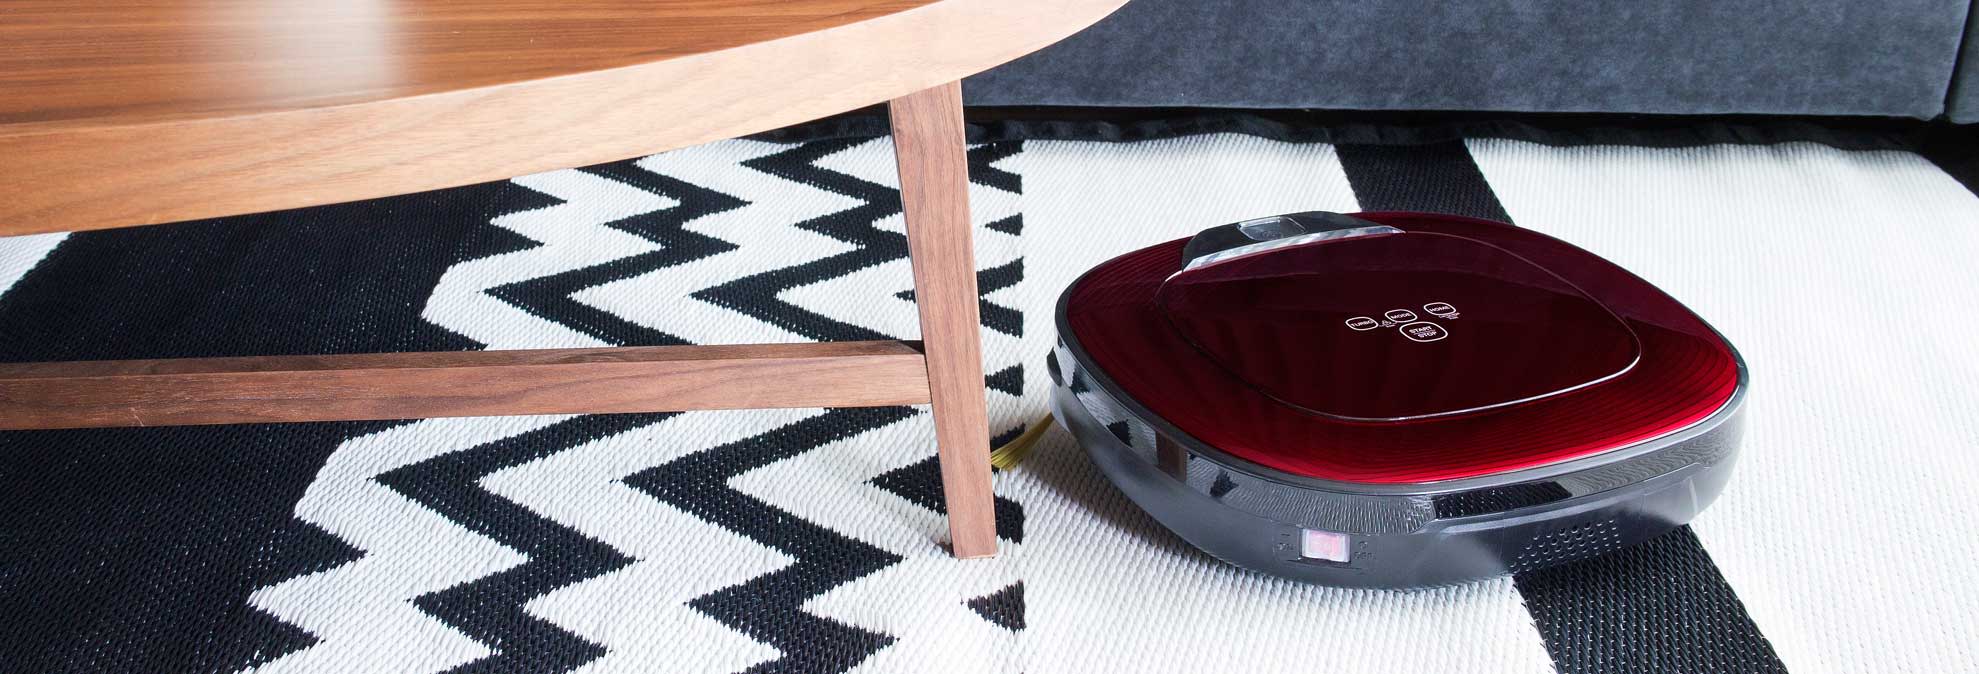 Best Robotic Vacuums From Consumer Reports' Tests